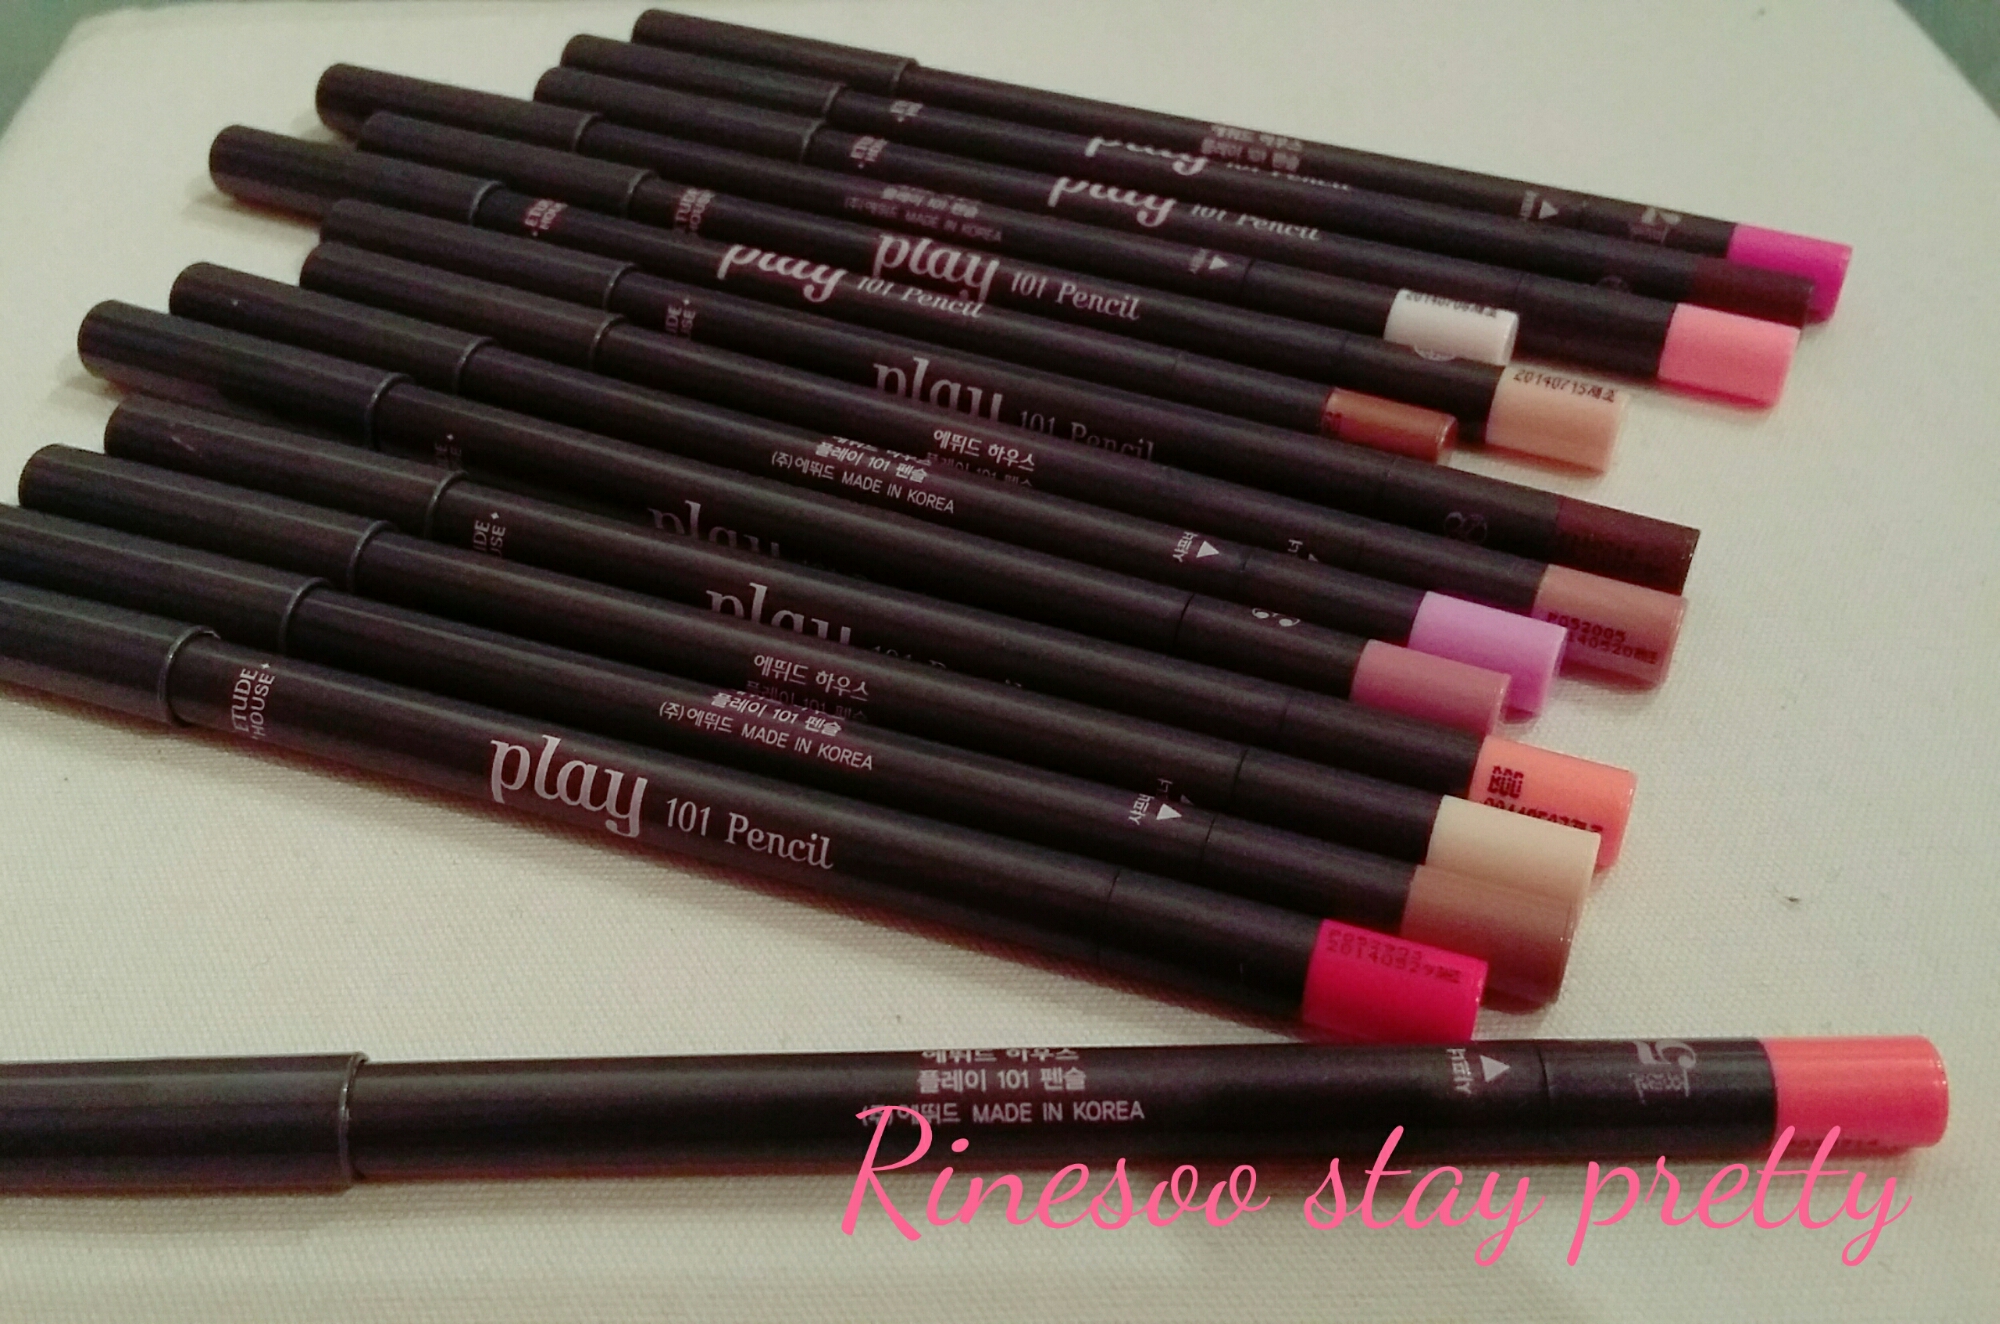 Etude House Play 101 Blending Pencil Swatches: All 25 Shades! - of Faces  and Fingers